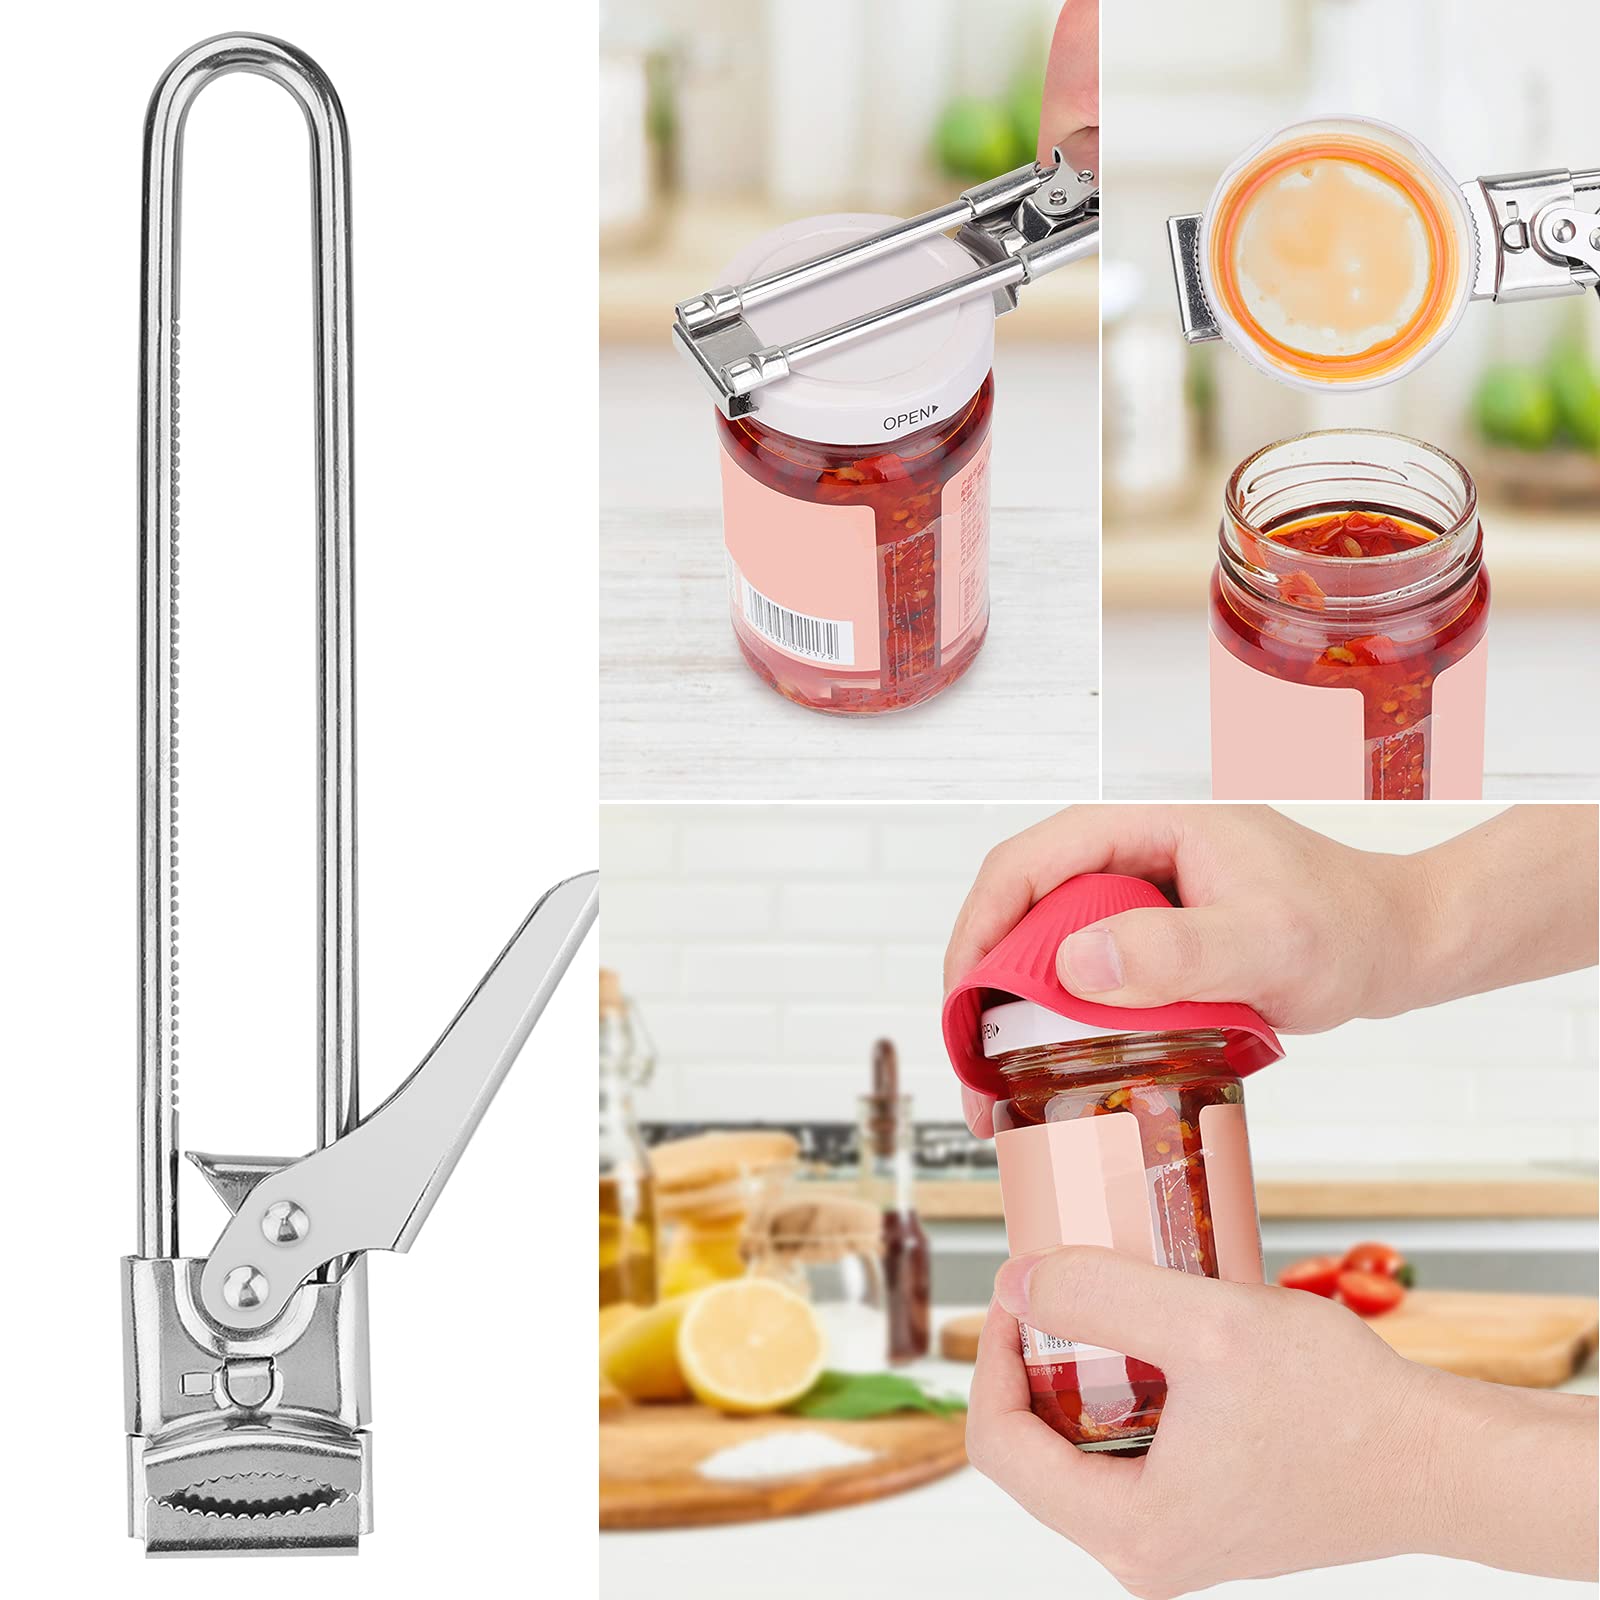 LUHUIYUAN Jar Opener for Seniors with Arthritis Jar Adjustable Stainless Steel Can Opener with Lip Gripper Pad Set Kitchen Gadgets Fit for Most Bottles Caps 9.45-Inch plus Extended version